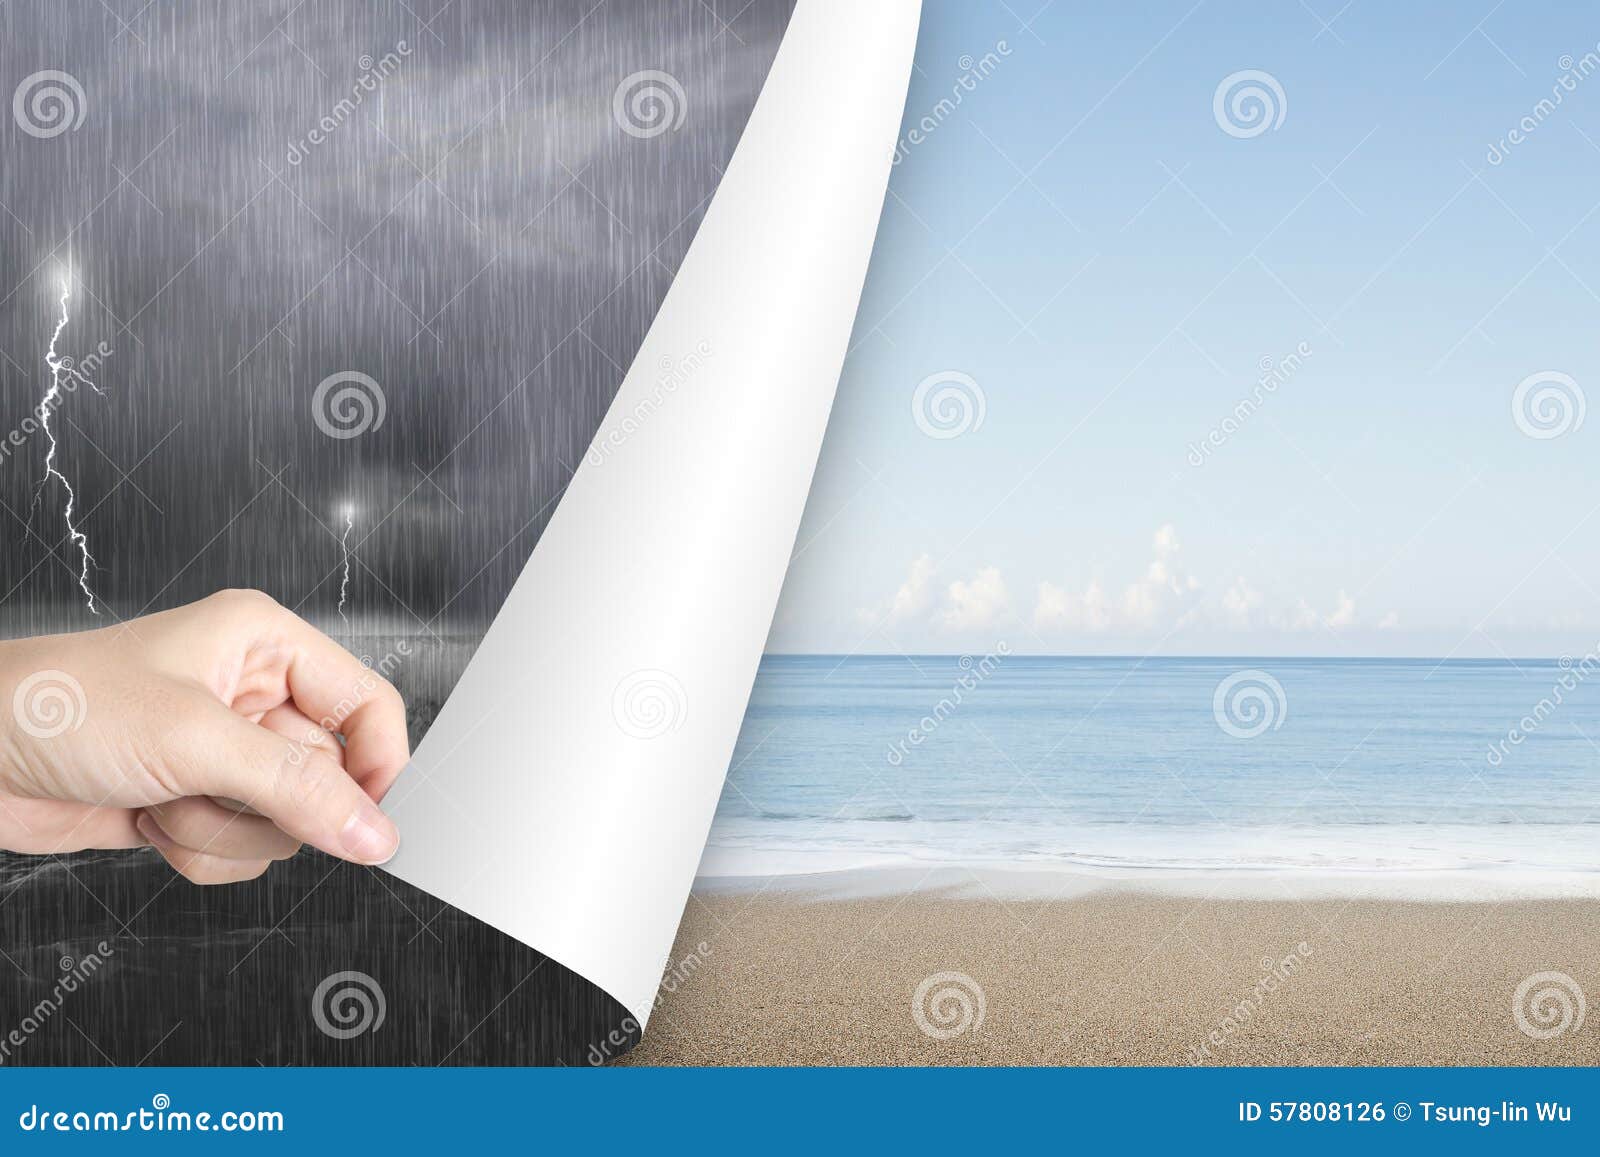 woman hand open calm beach page replace stormy ocean